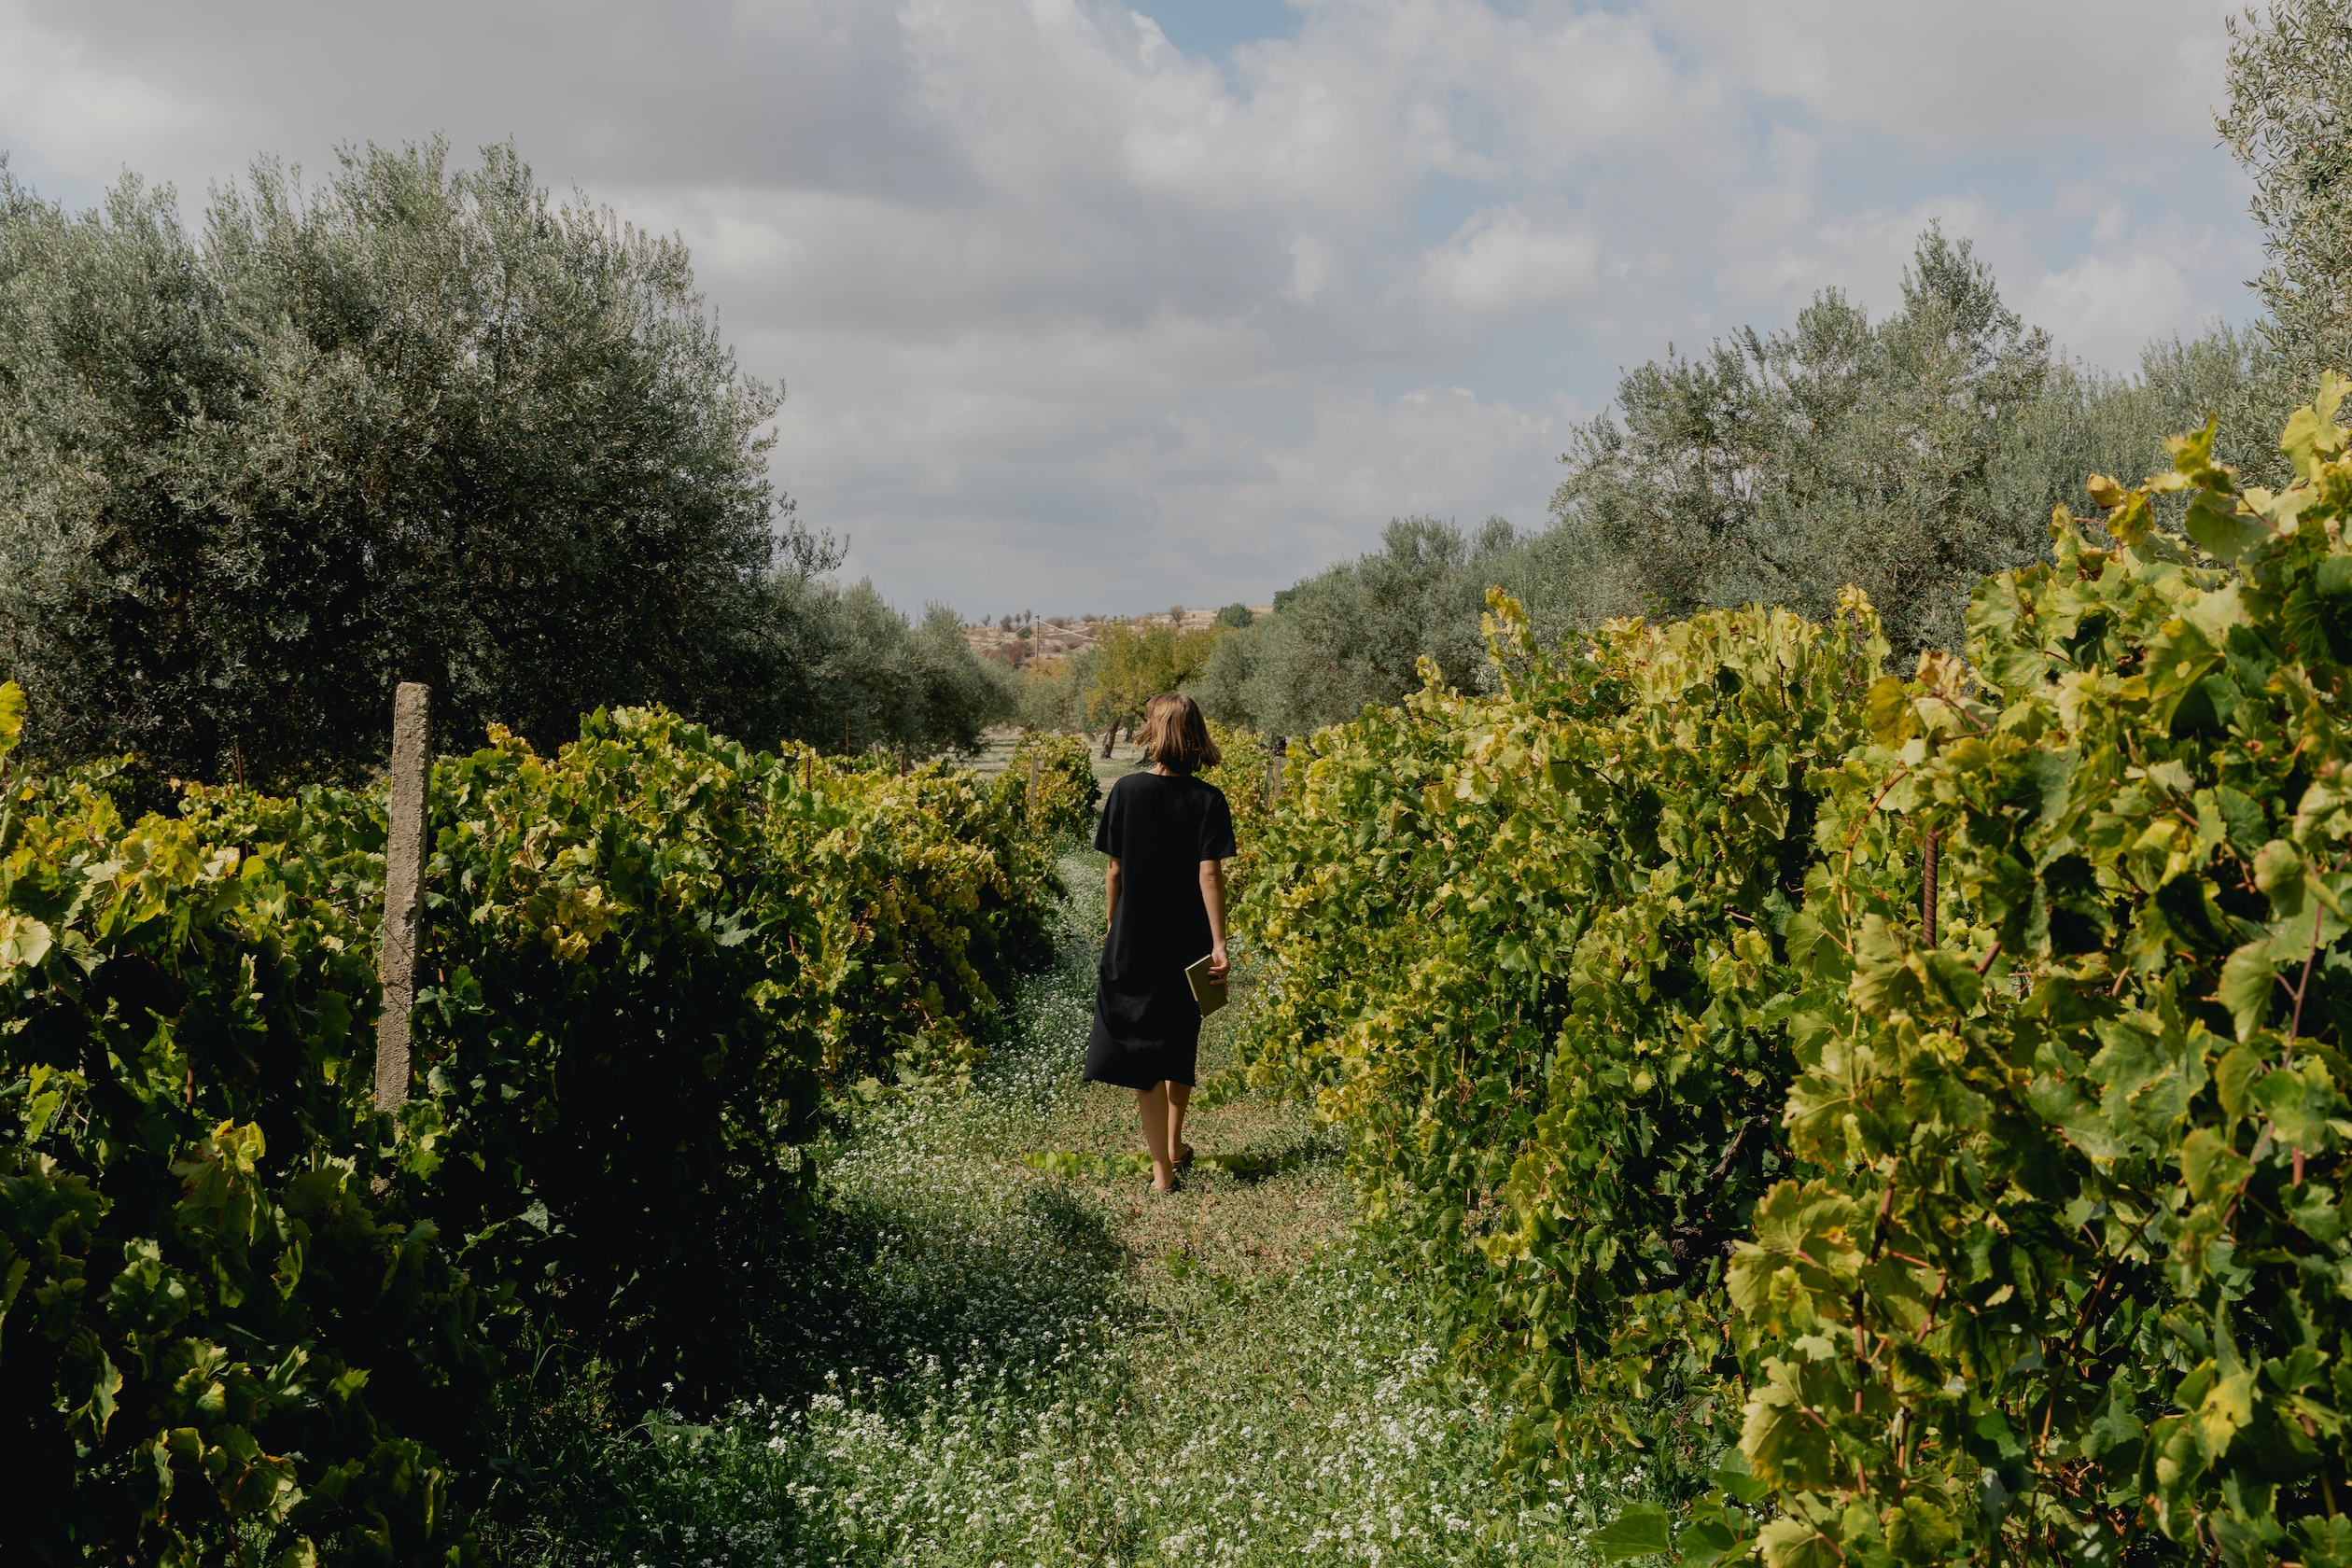 Photo of a person walking through a vineyard carrying a book.